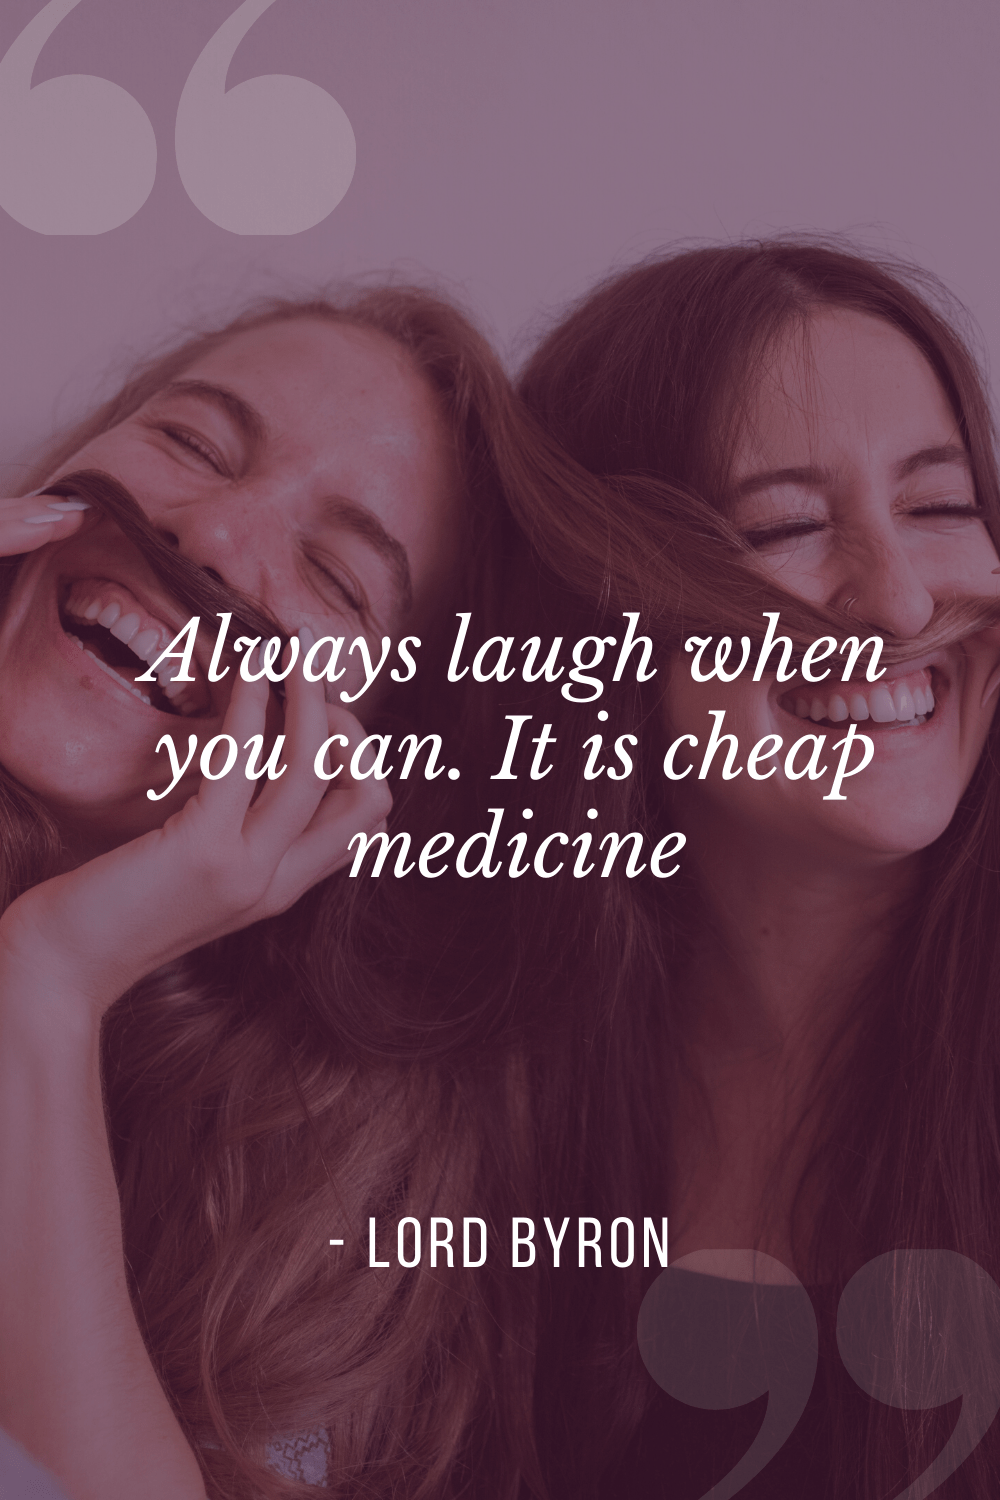 “Always laugh when you can. It is cheap medicine”, Lord Byron